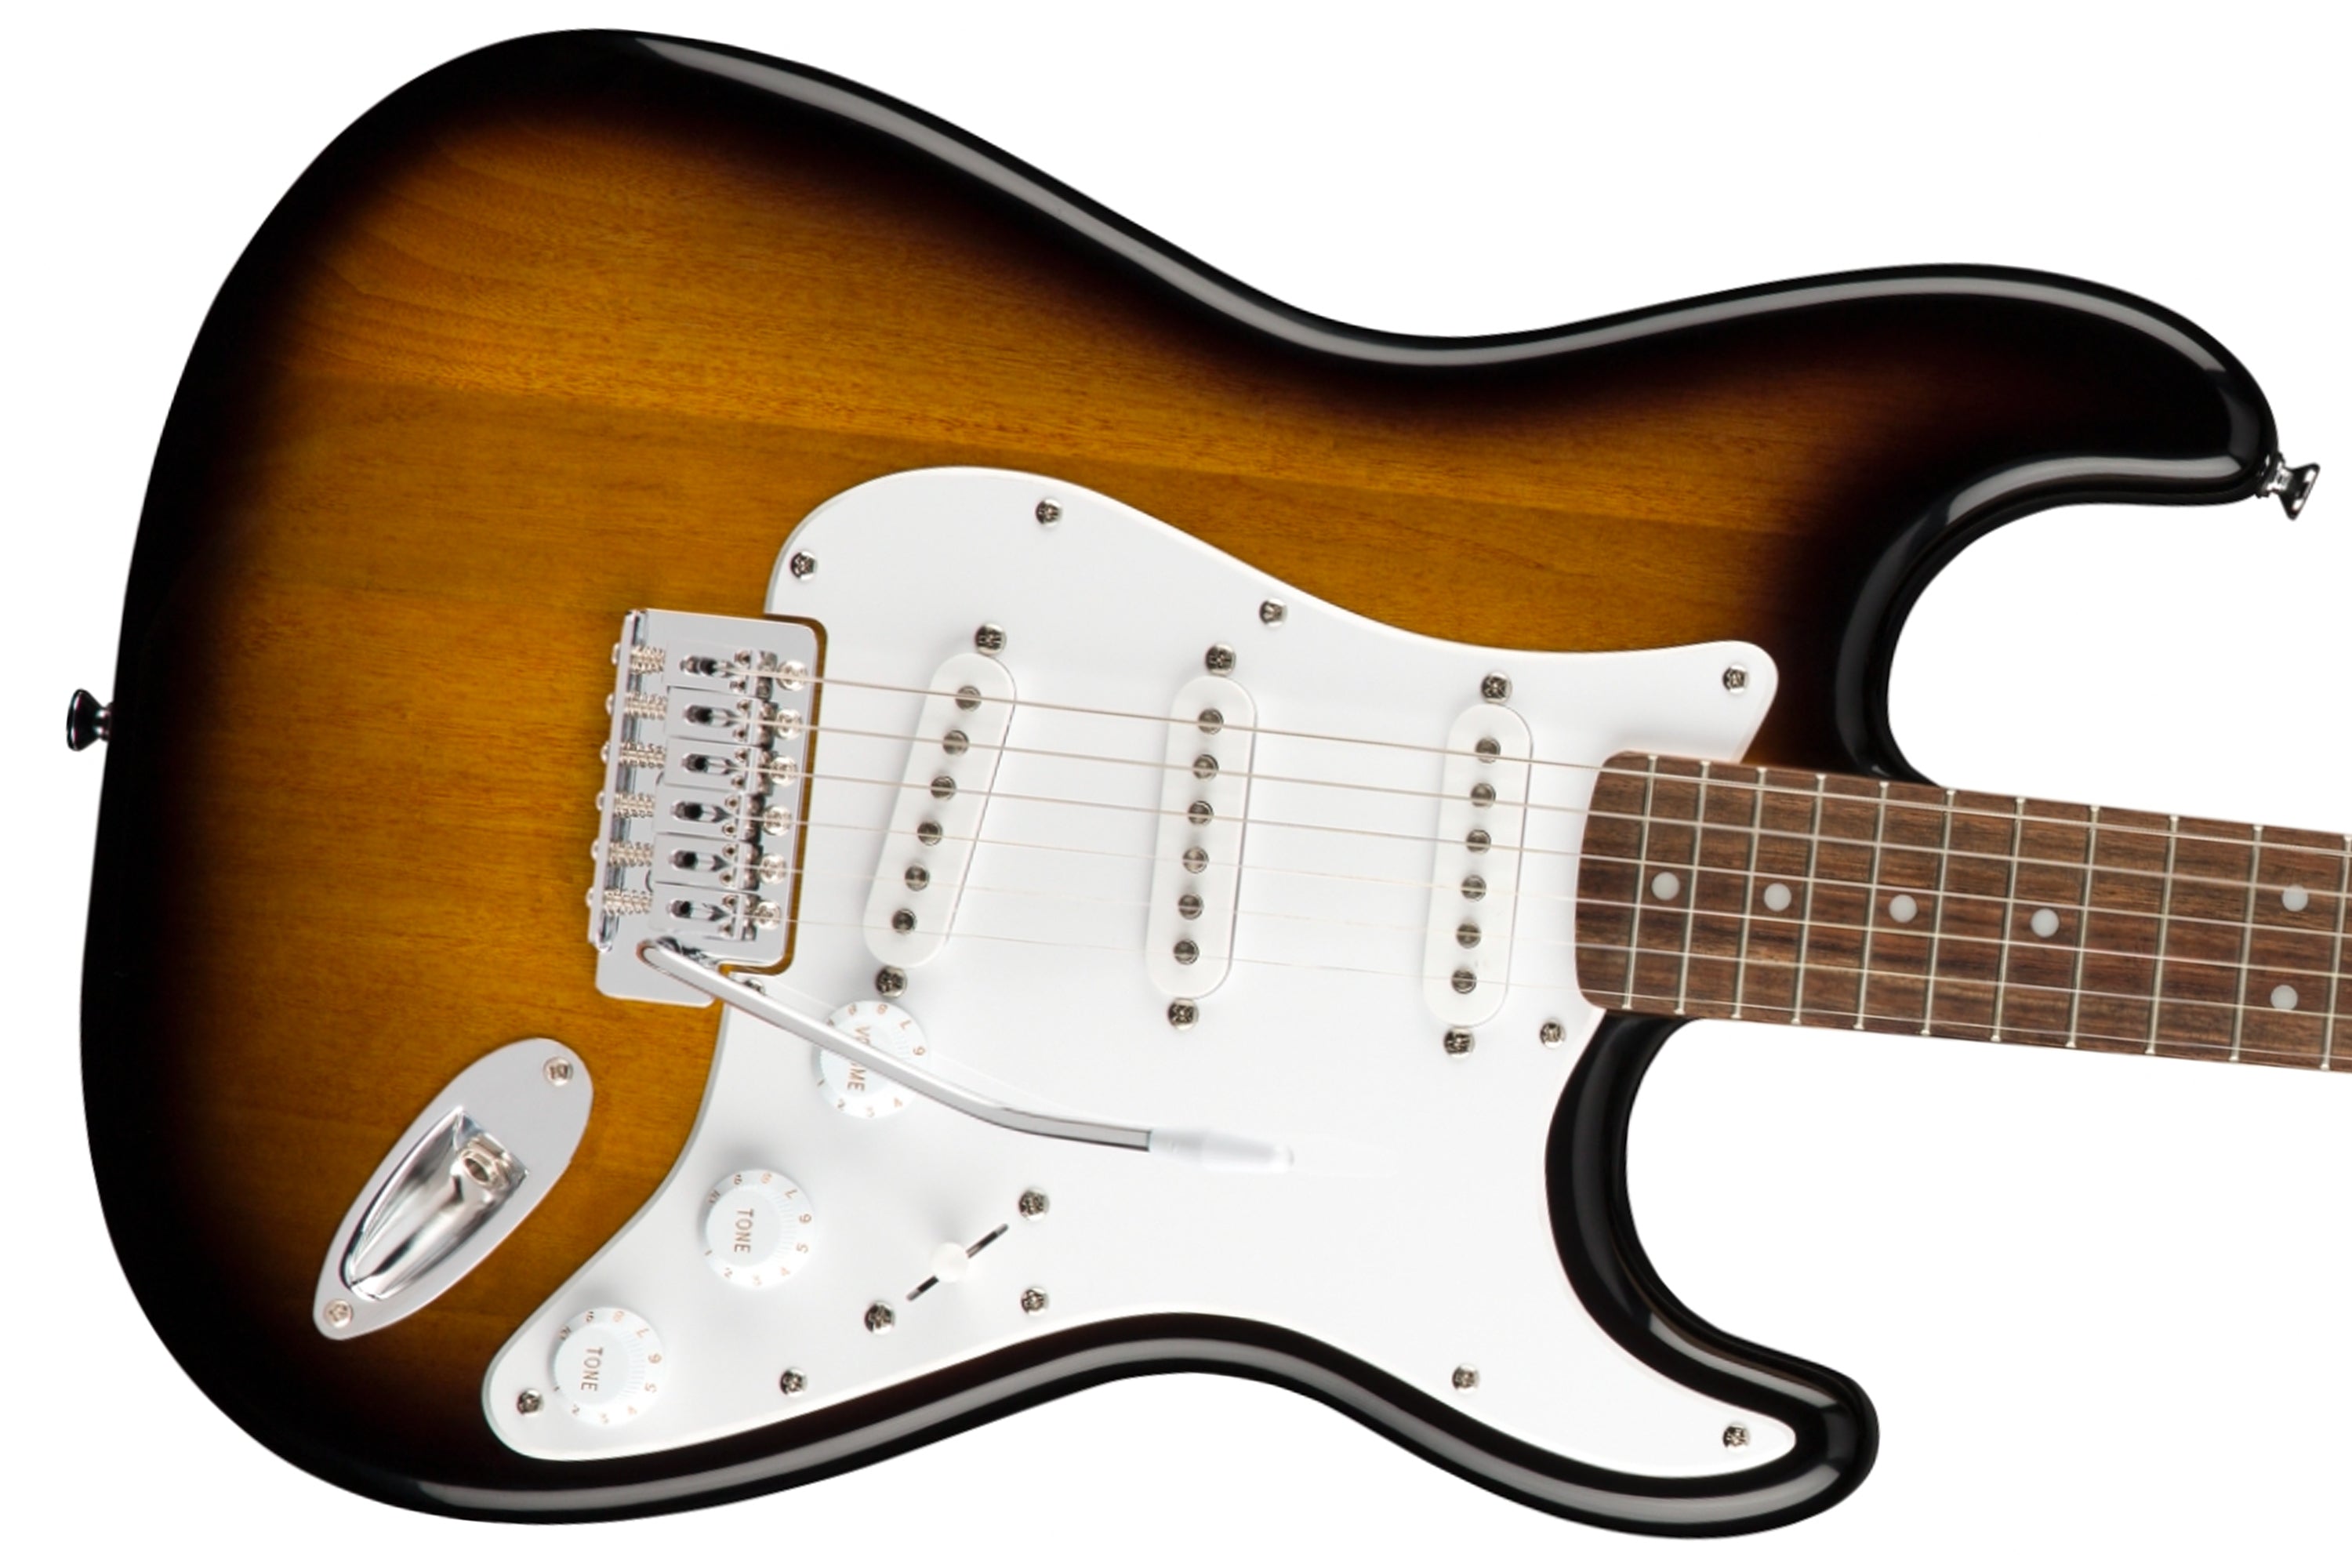 Squire By Fender Stratocaster Guitar Pack - Brown Sunburst